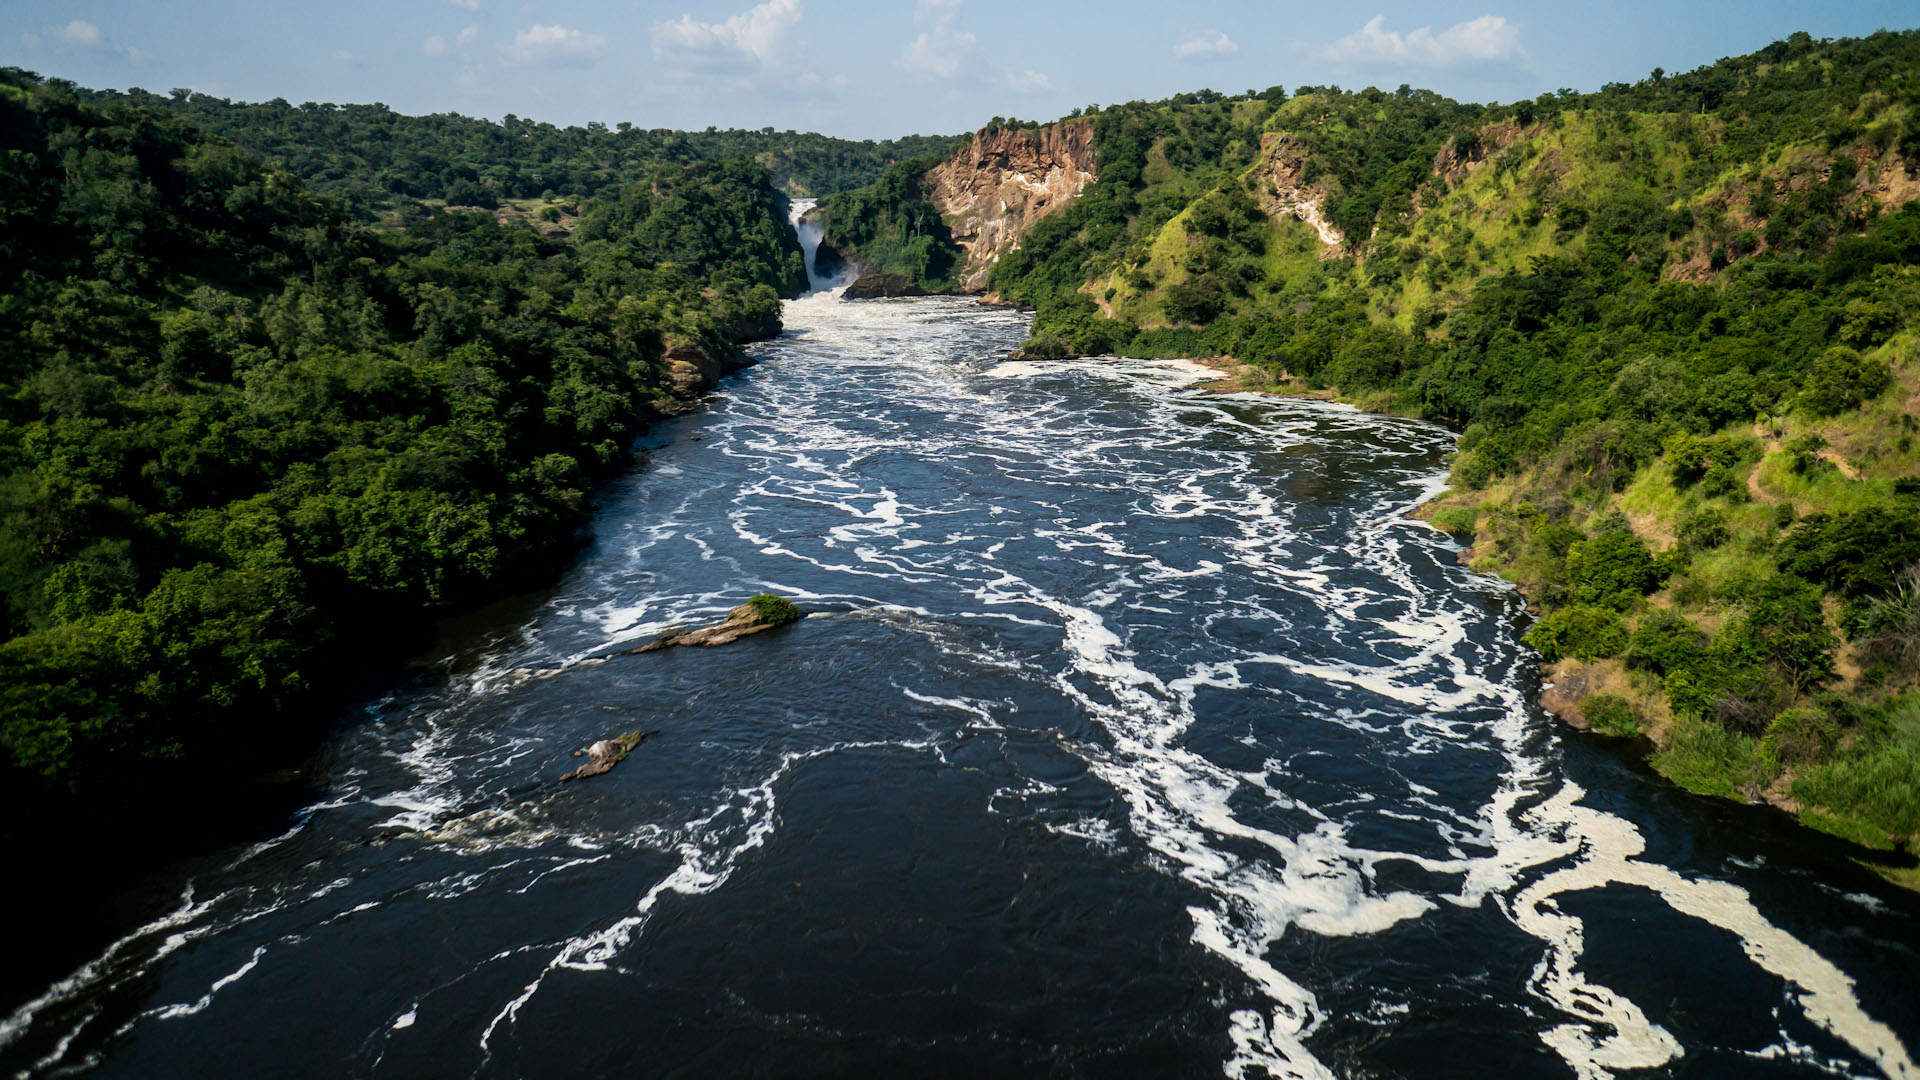 The Nile River, Jinja and the source of the Nile, Natural wonders, Scenic beauty, 1920x1080 Full HD Desktop